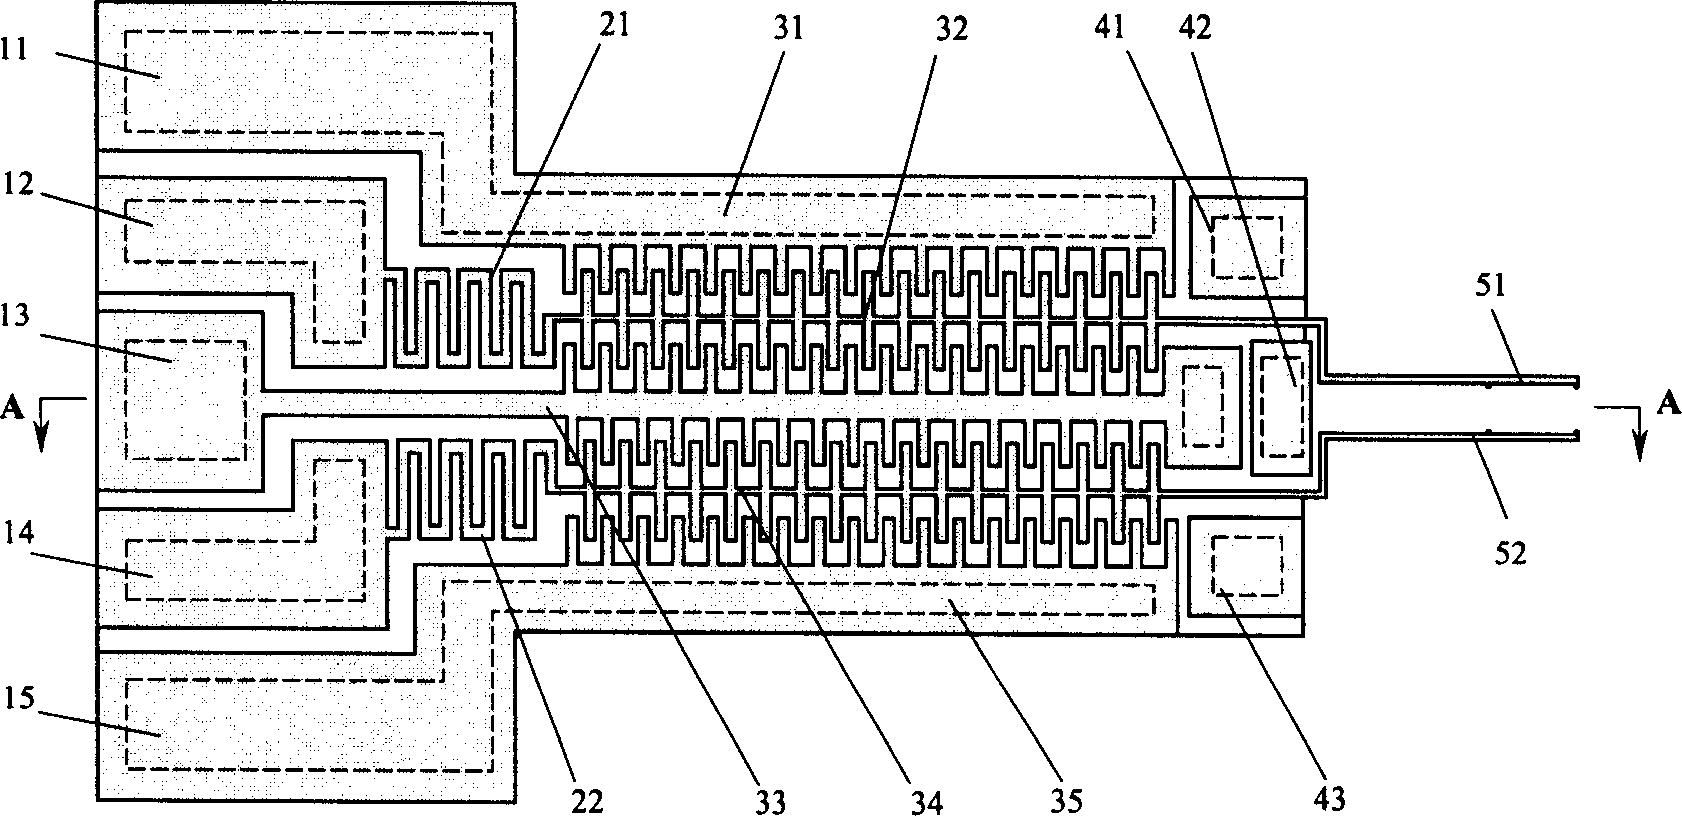 Electrostatic actuating micro-holder